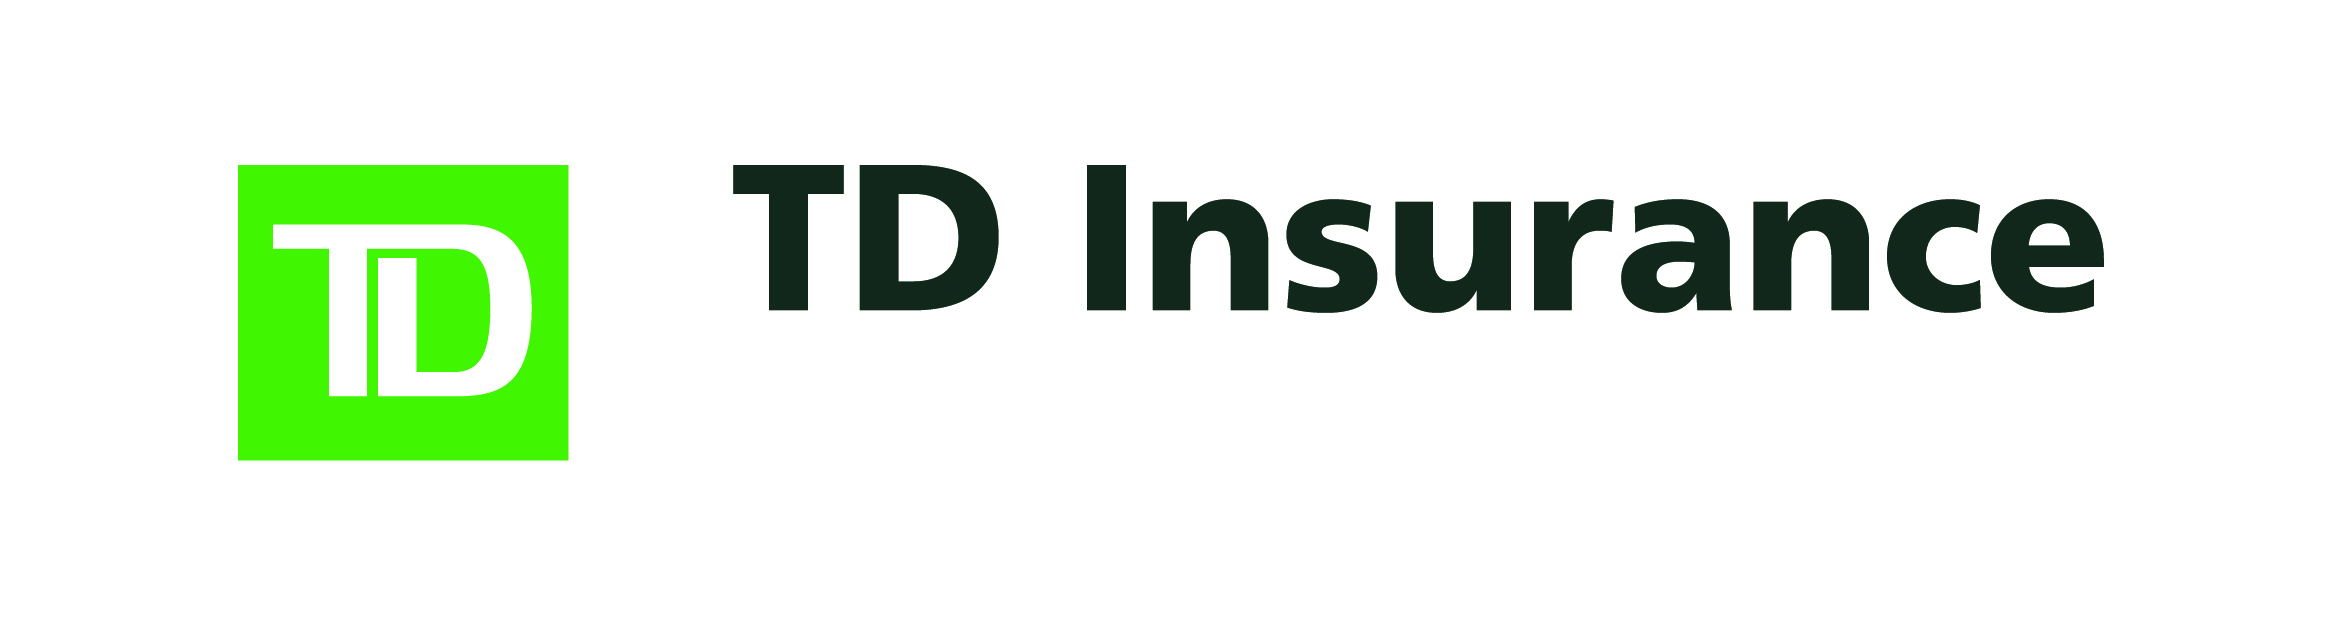 TD Home and Auto Insurance University of Lethbridge